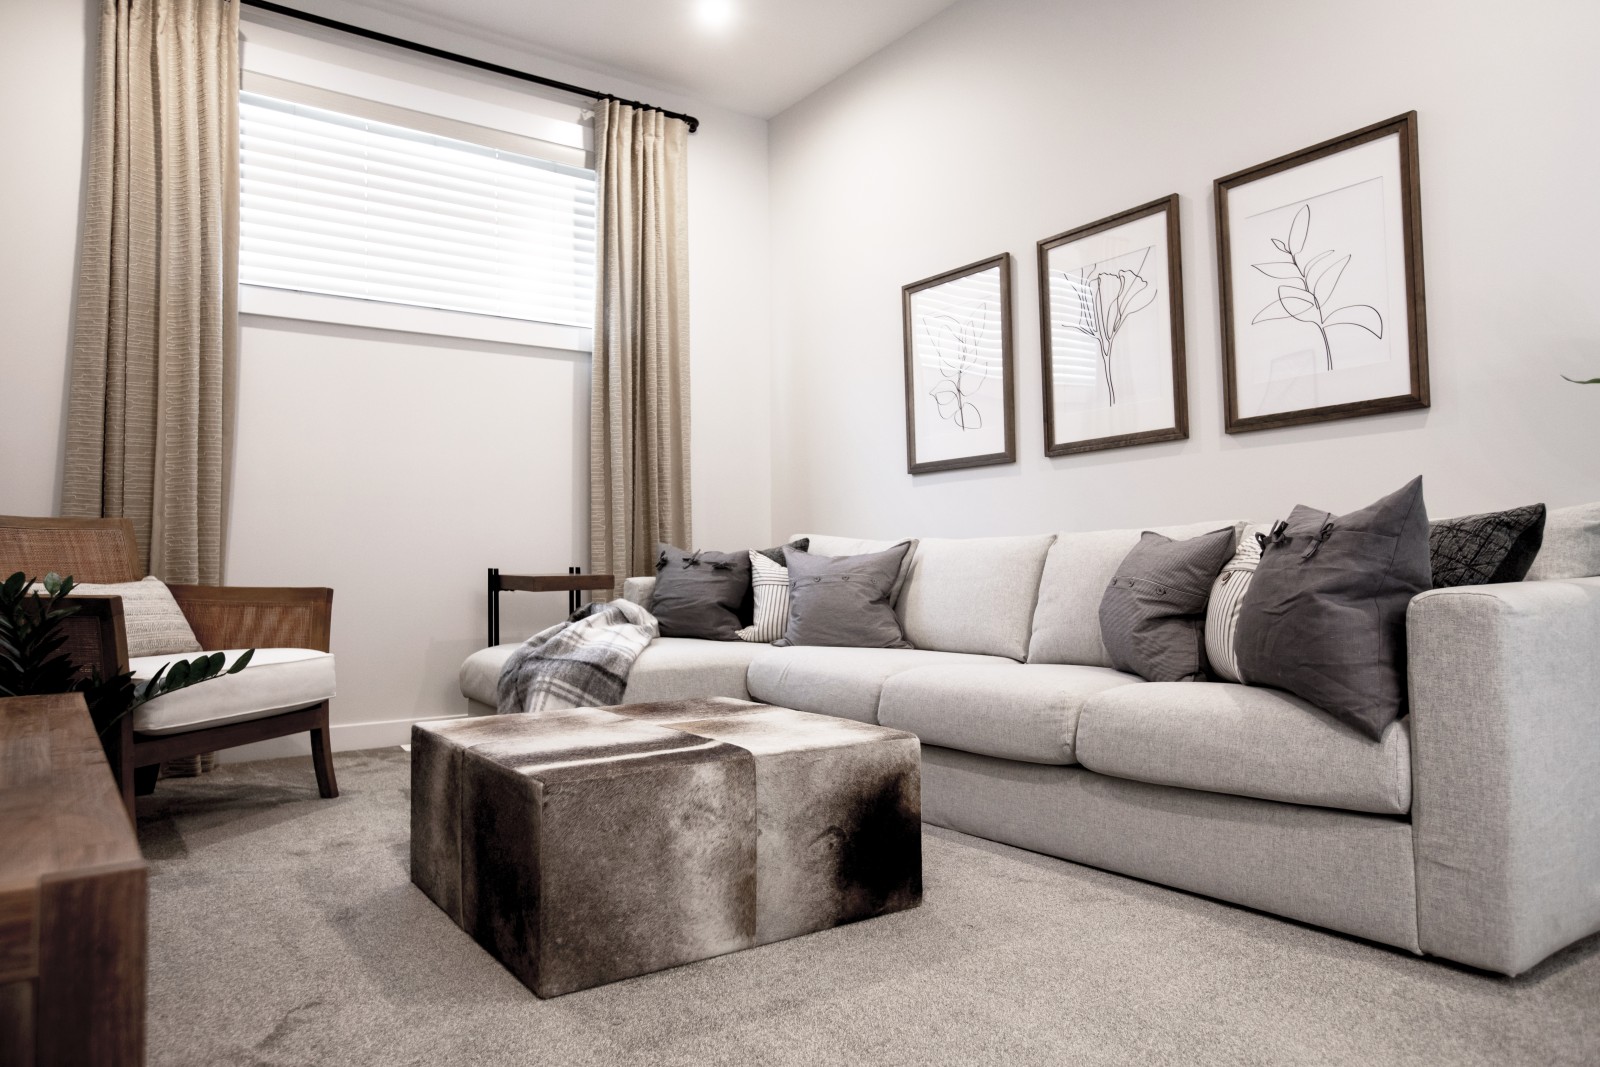 Bonus room in the Odessa showhome with comfy couch, neutral accents and warm tones